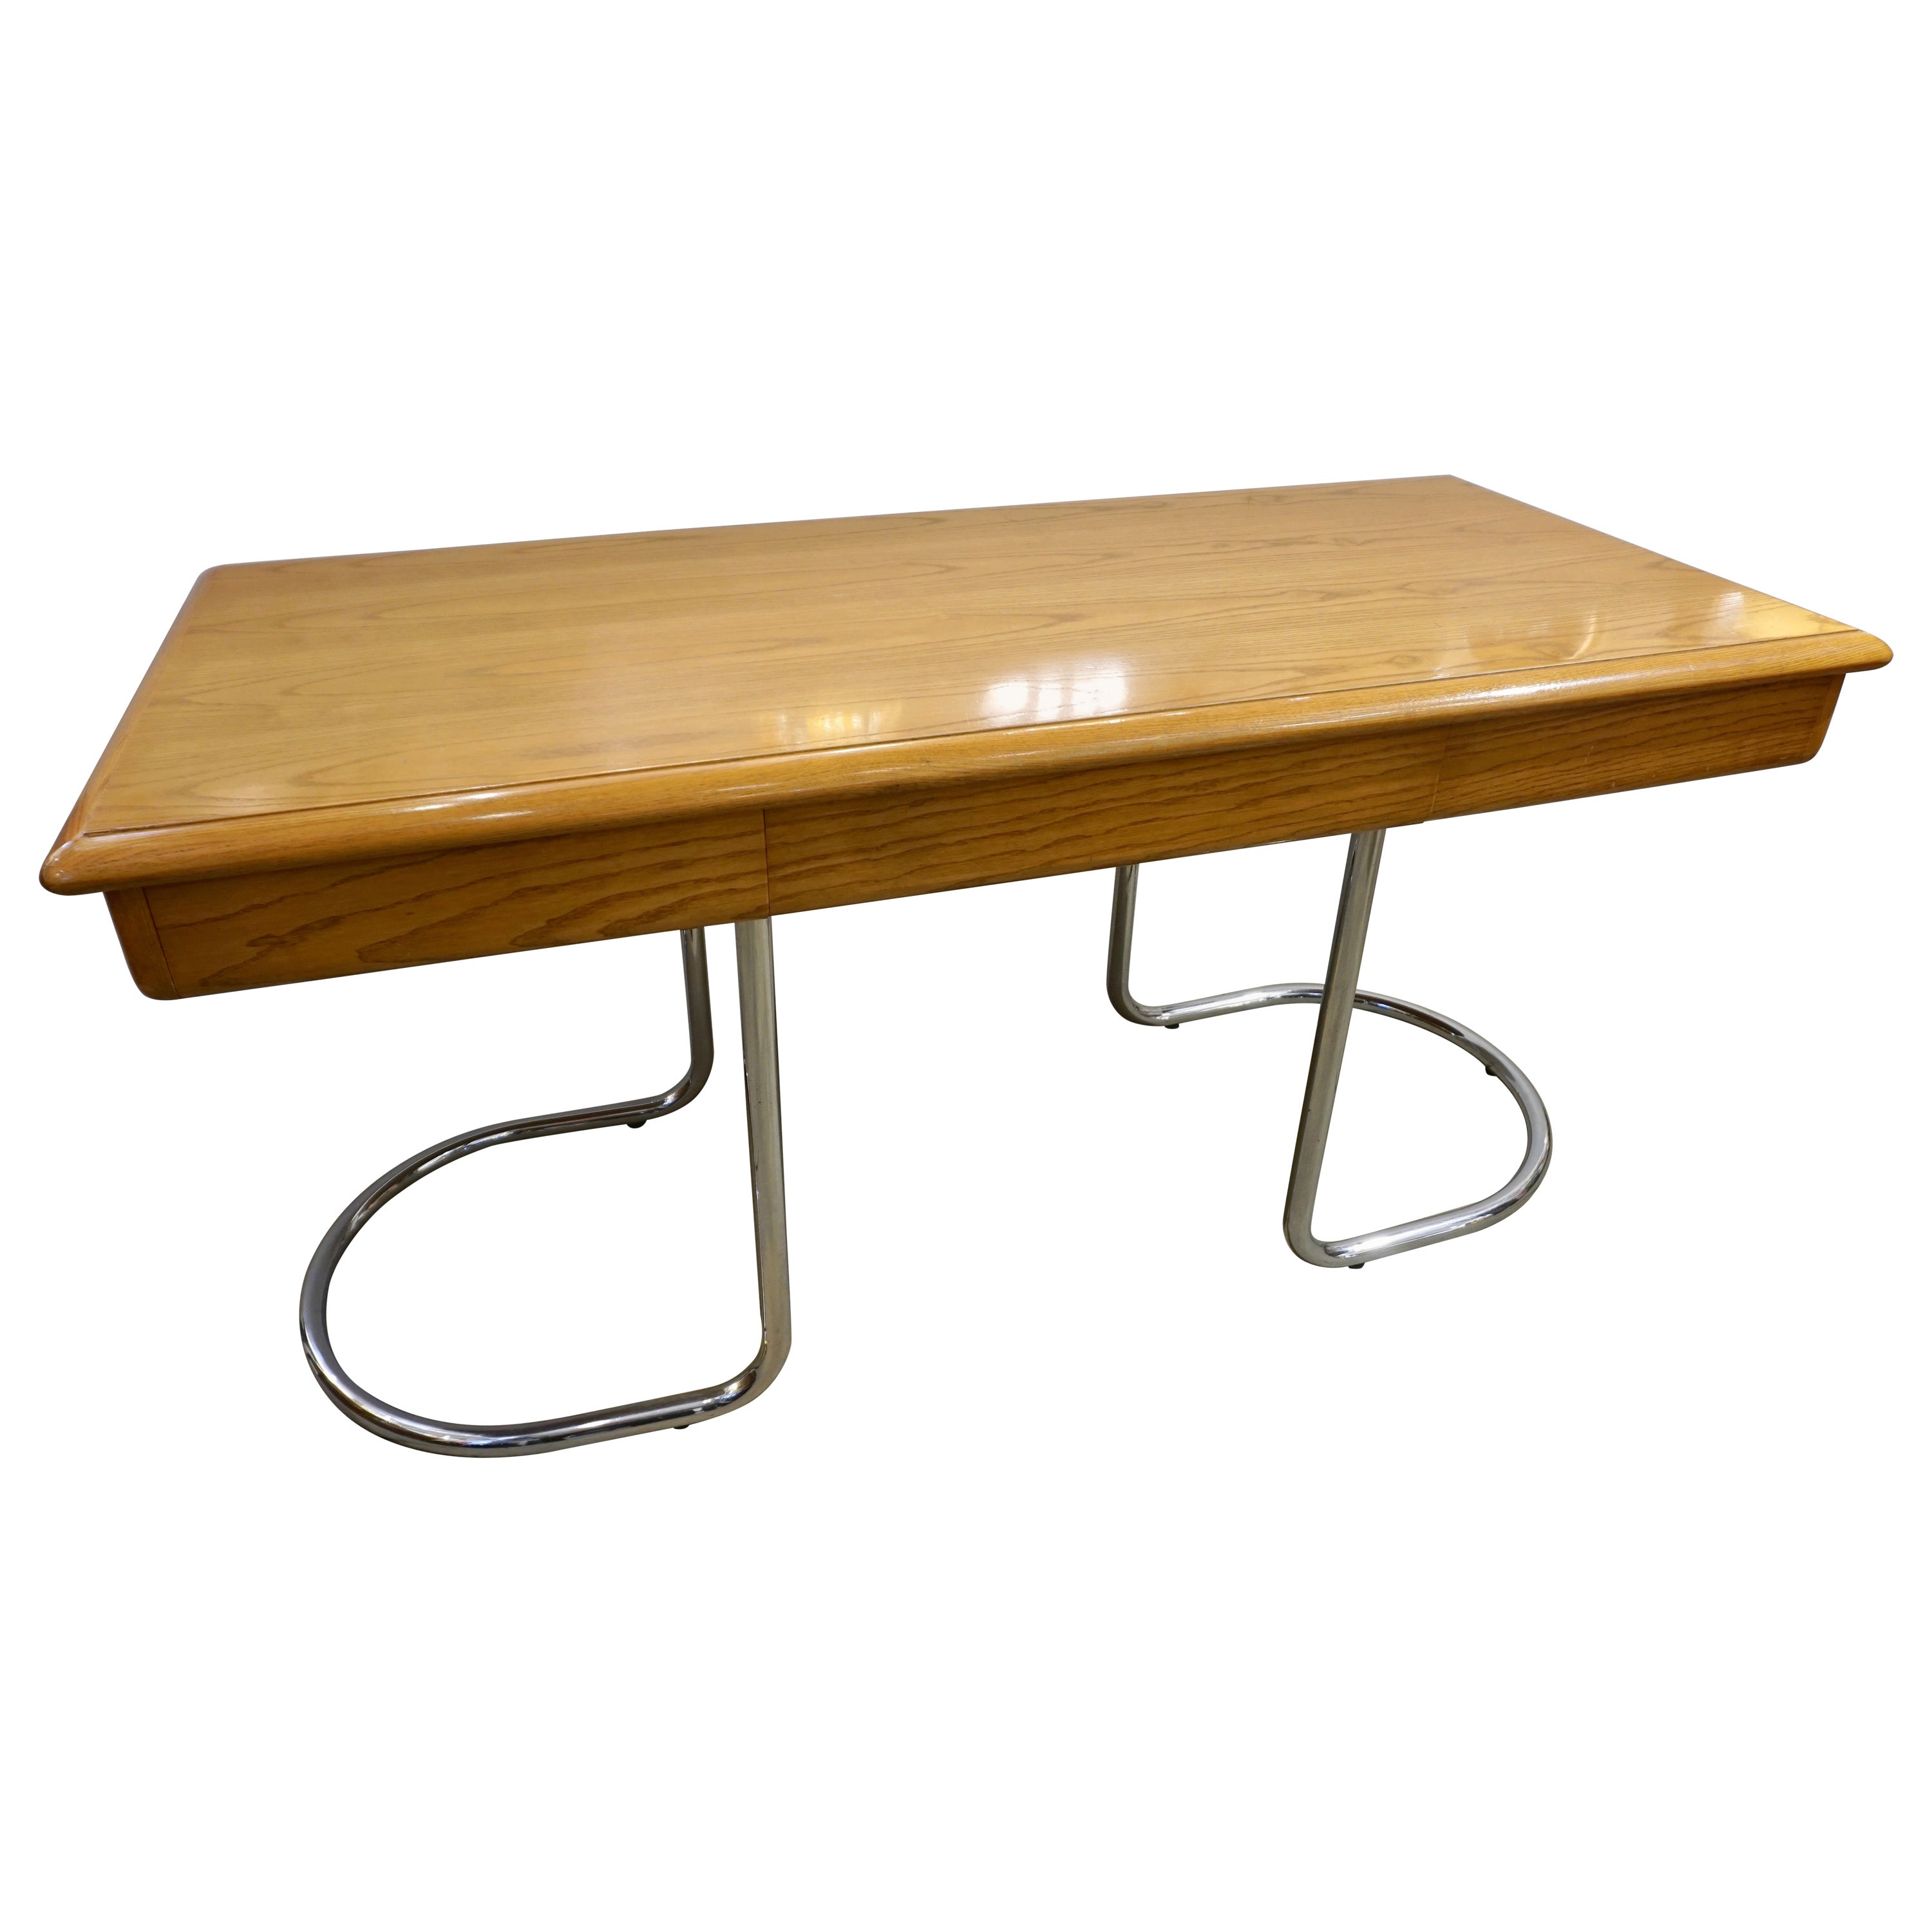 A Mid-Century Modern center desk in ash tree of clean sleek shape, very well designed, the top surface with quality rounded corners and minimum thickness to allow 3 functional drawers, raised on continuous curved legs in nickel finish with a very